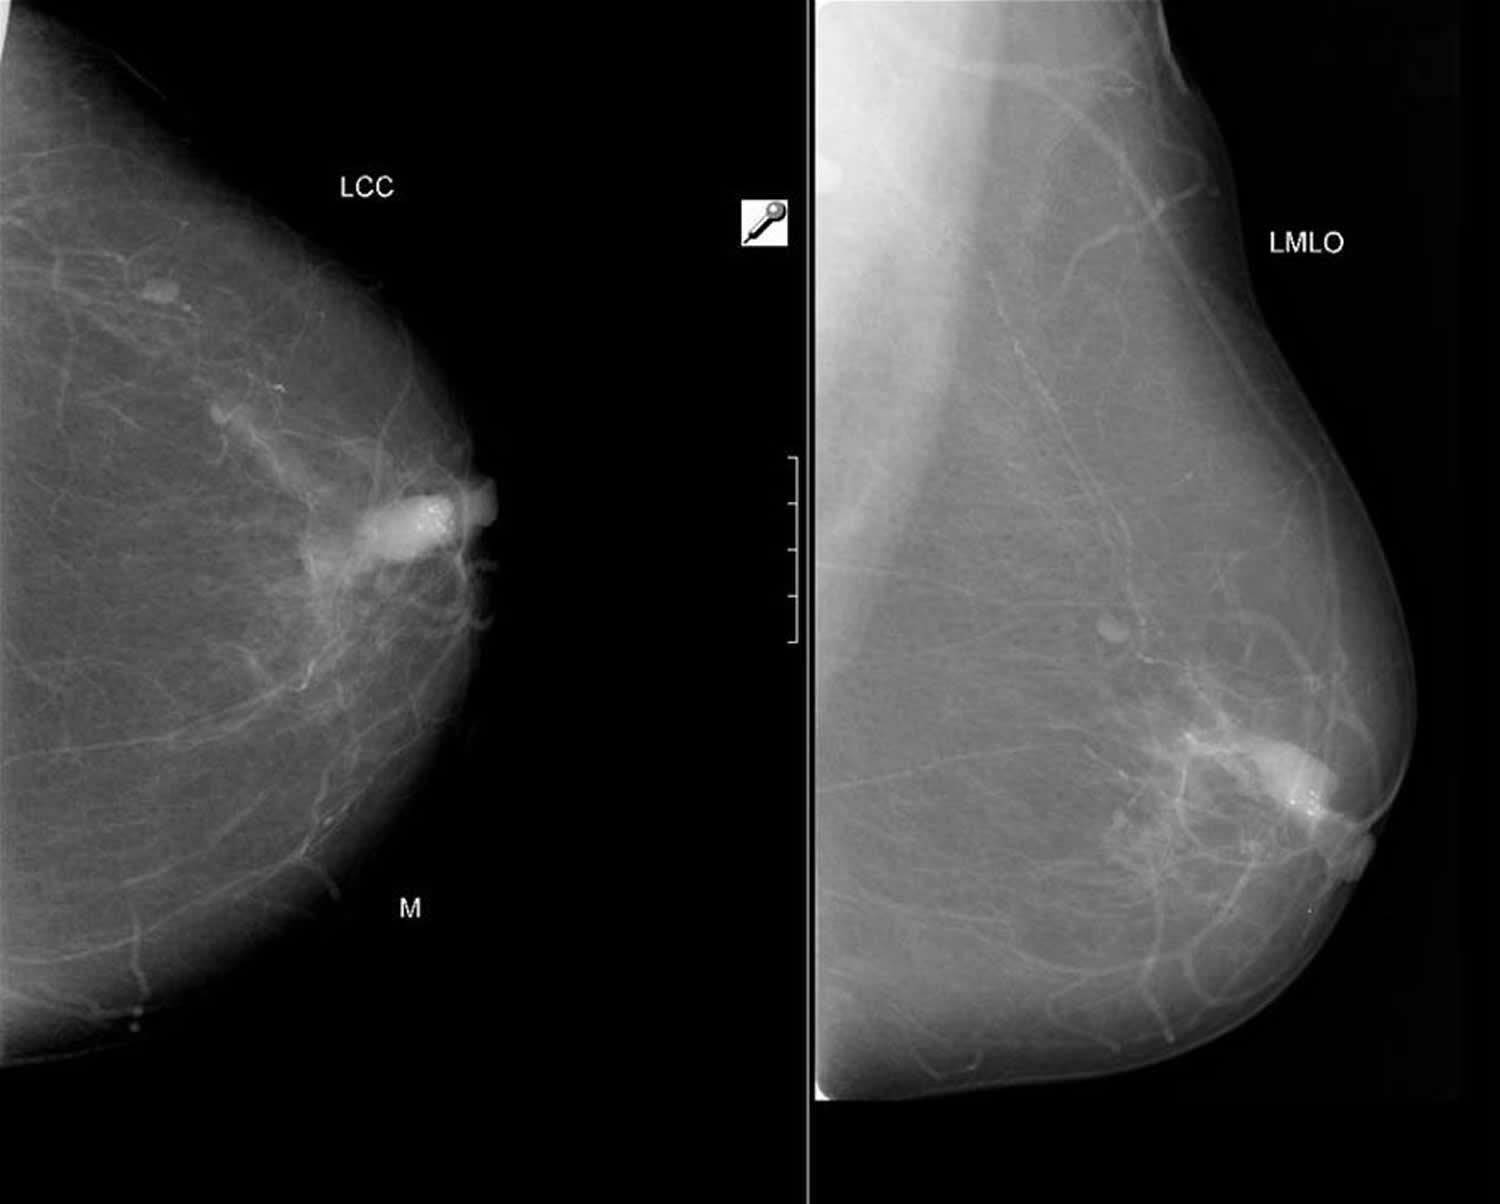 Intraductal carcinoma of the breast